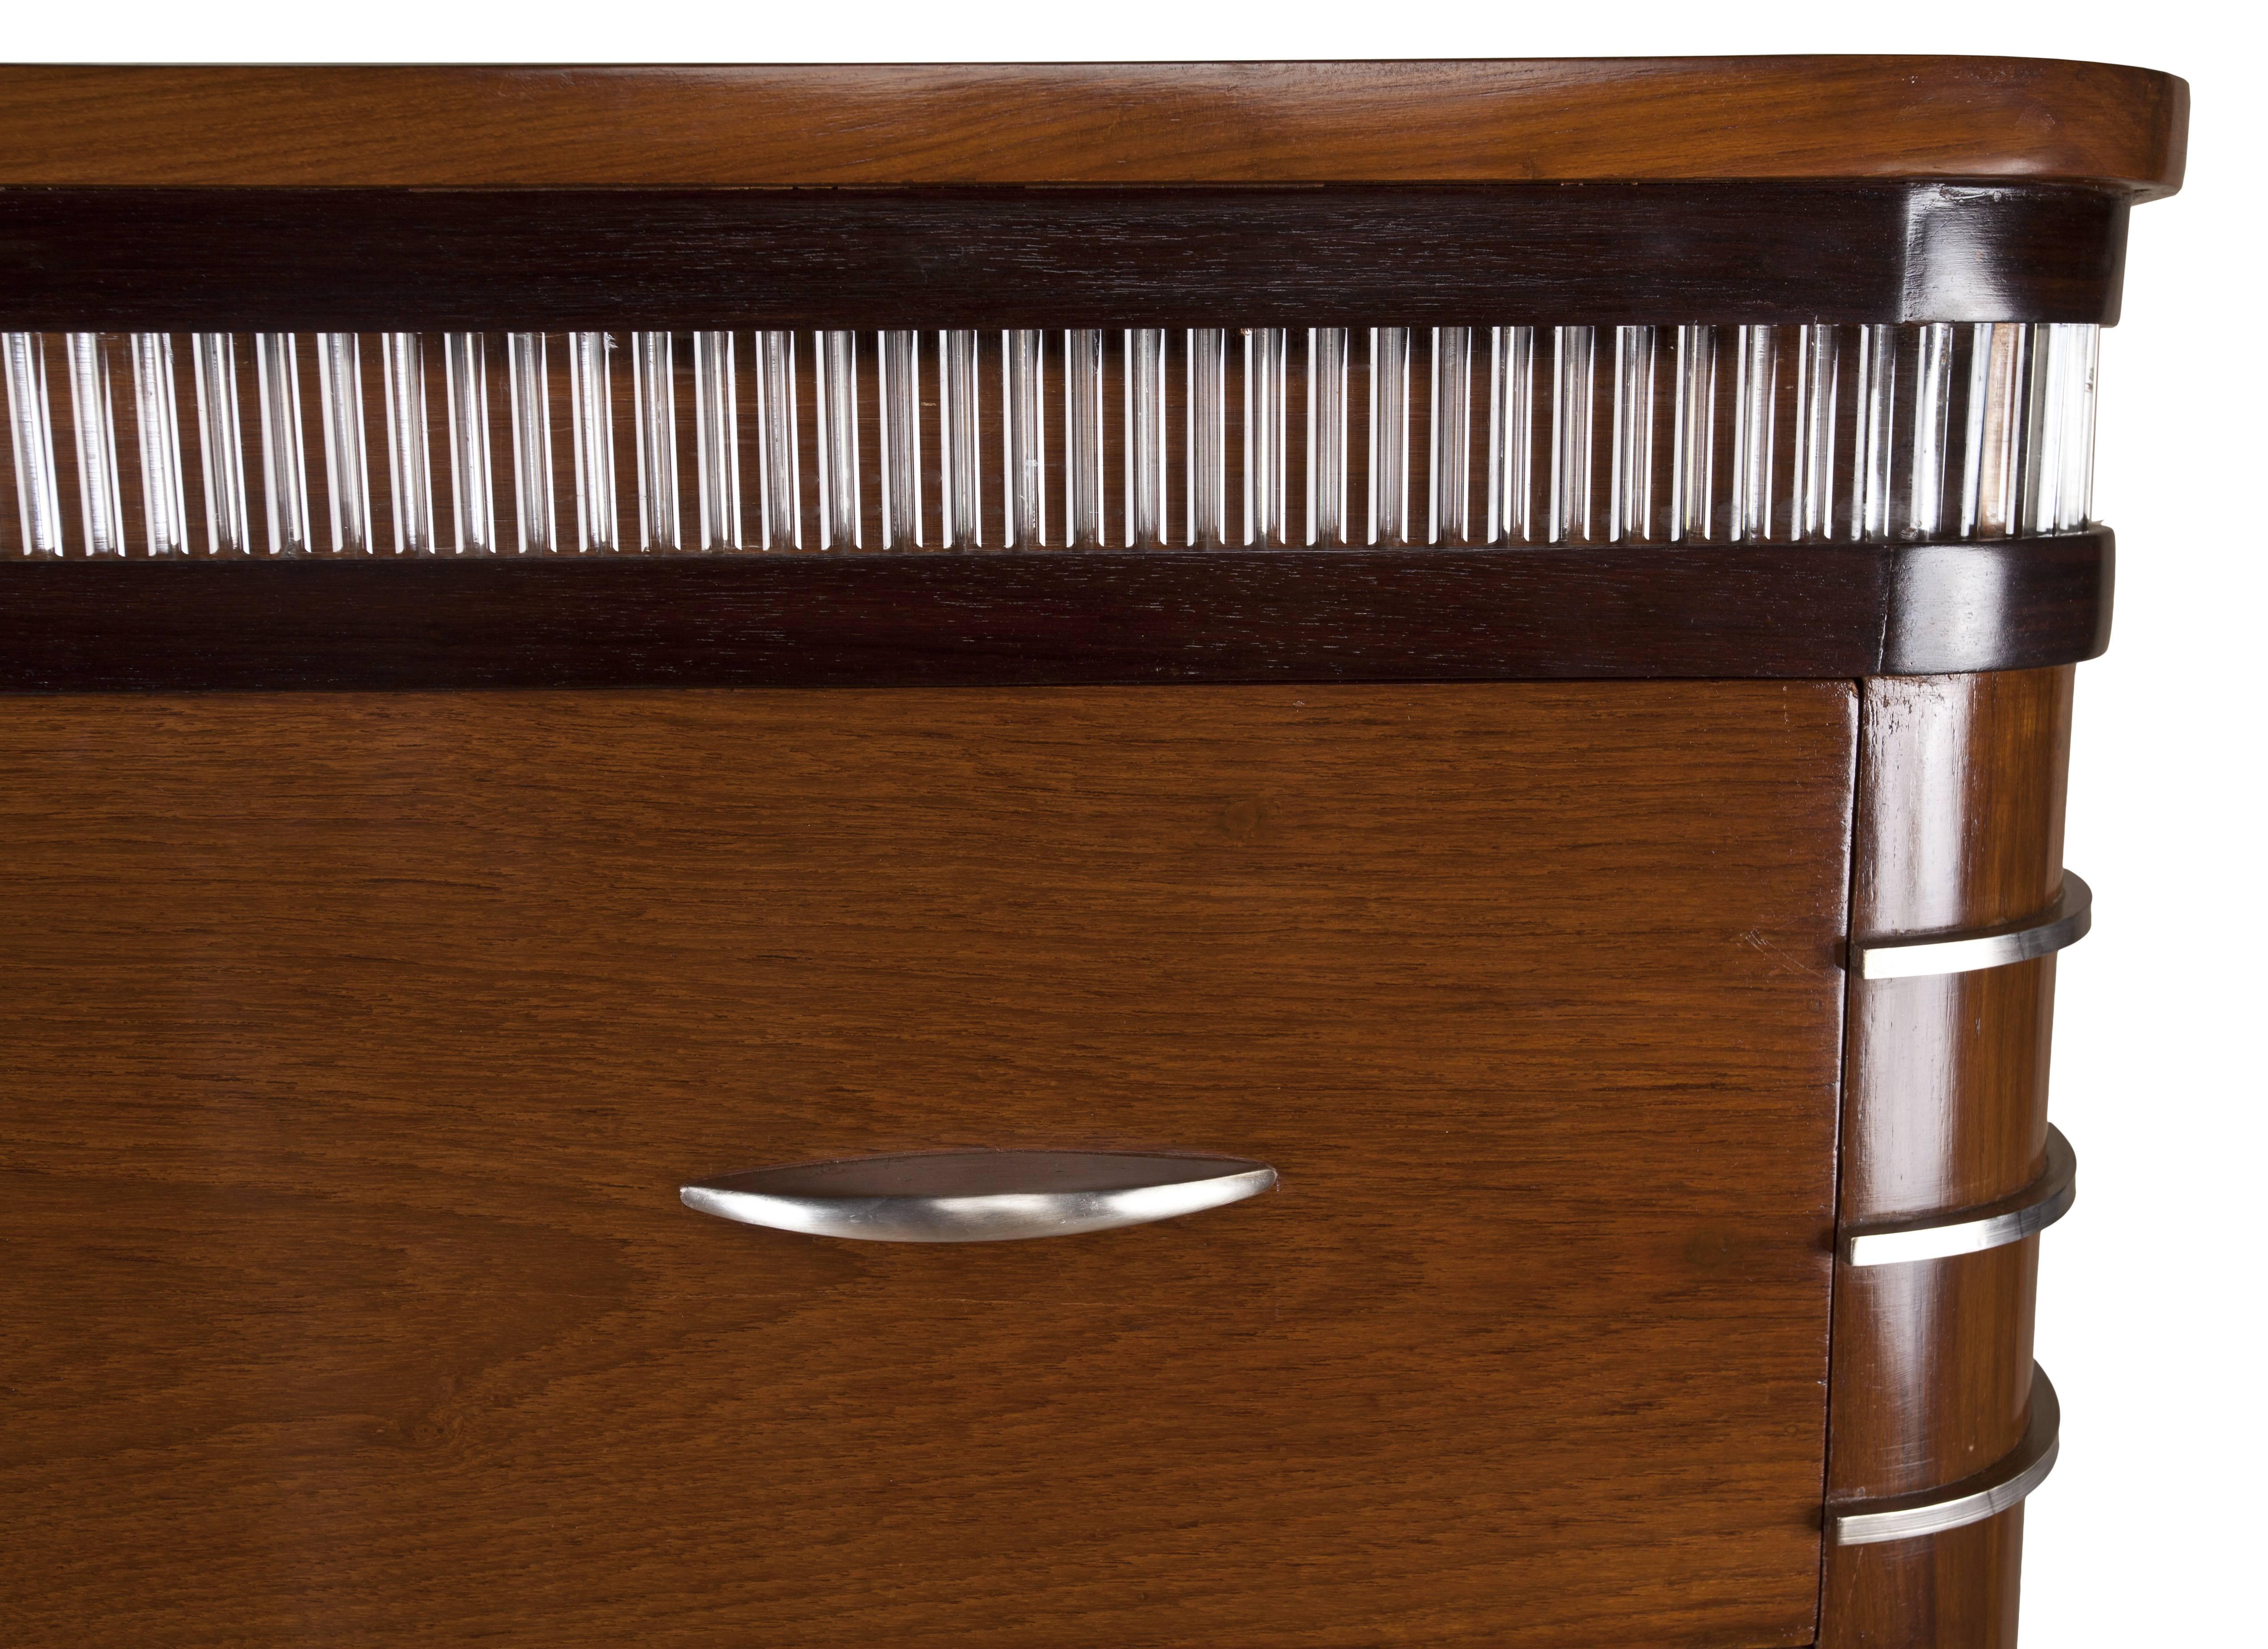 Art Deco Spectacular Deco Period Chest of Drawers with Glass Inlay and Chrome Details